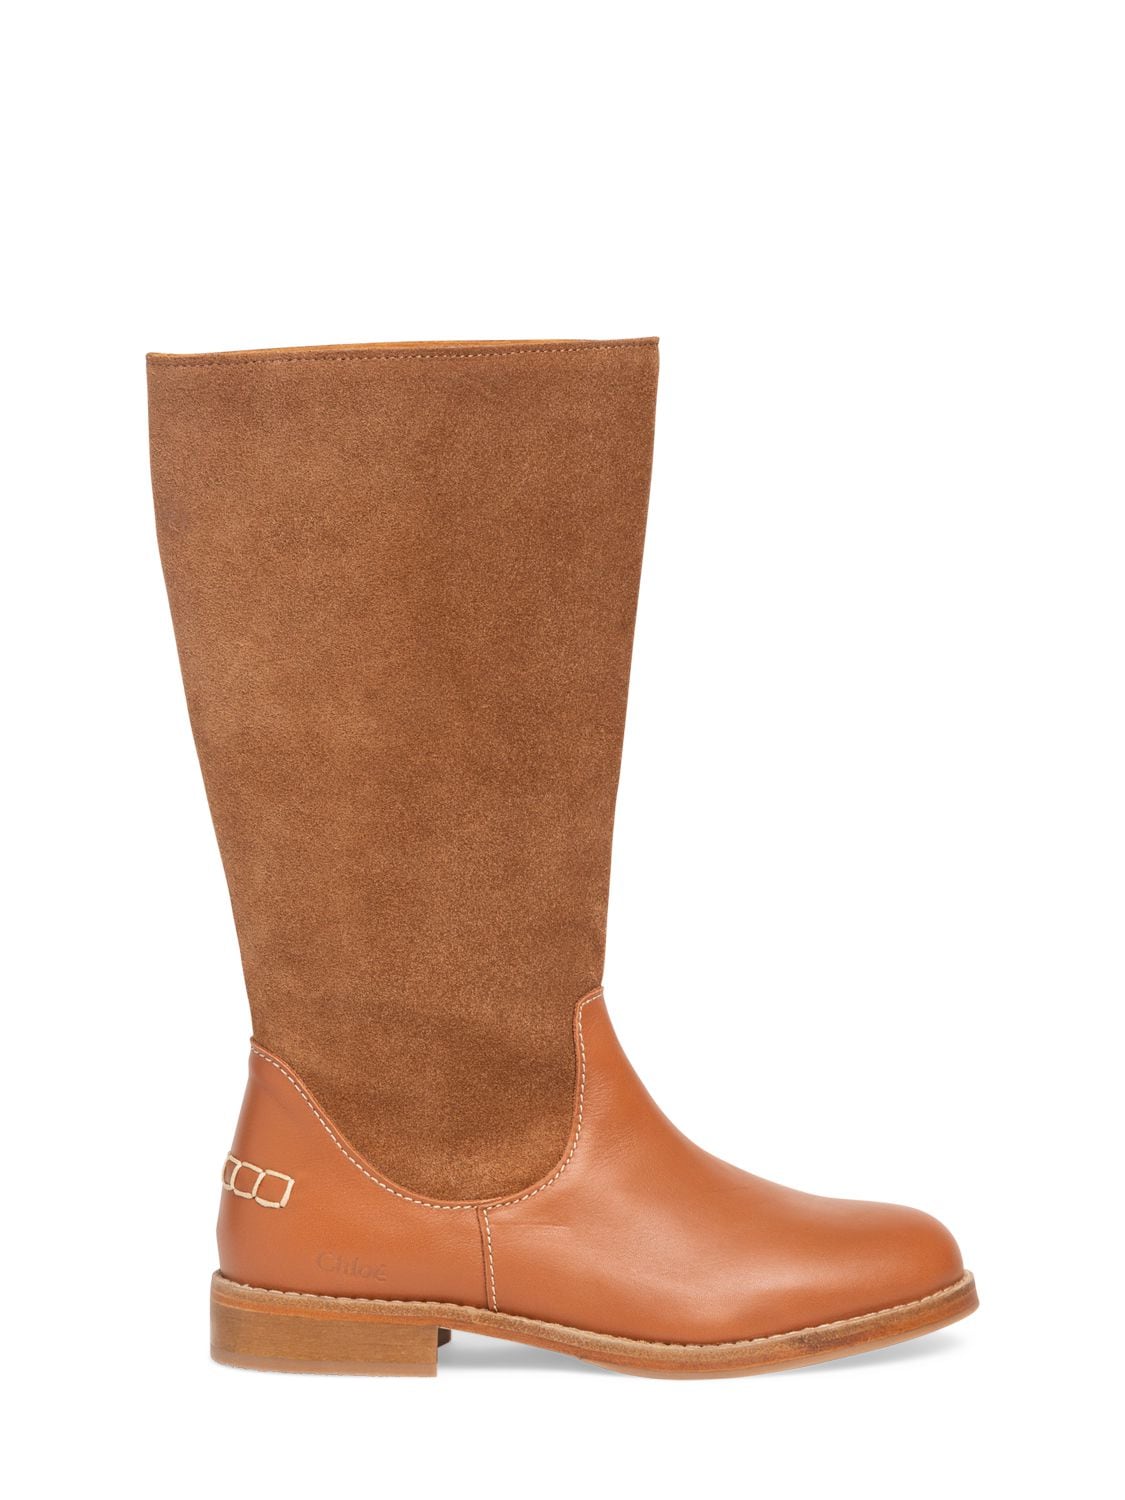 Chloé Kids' Leather & Suede Boots In Brown